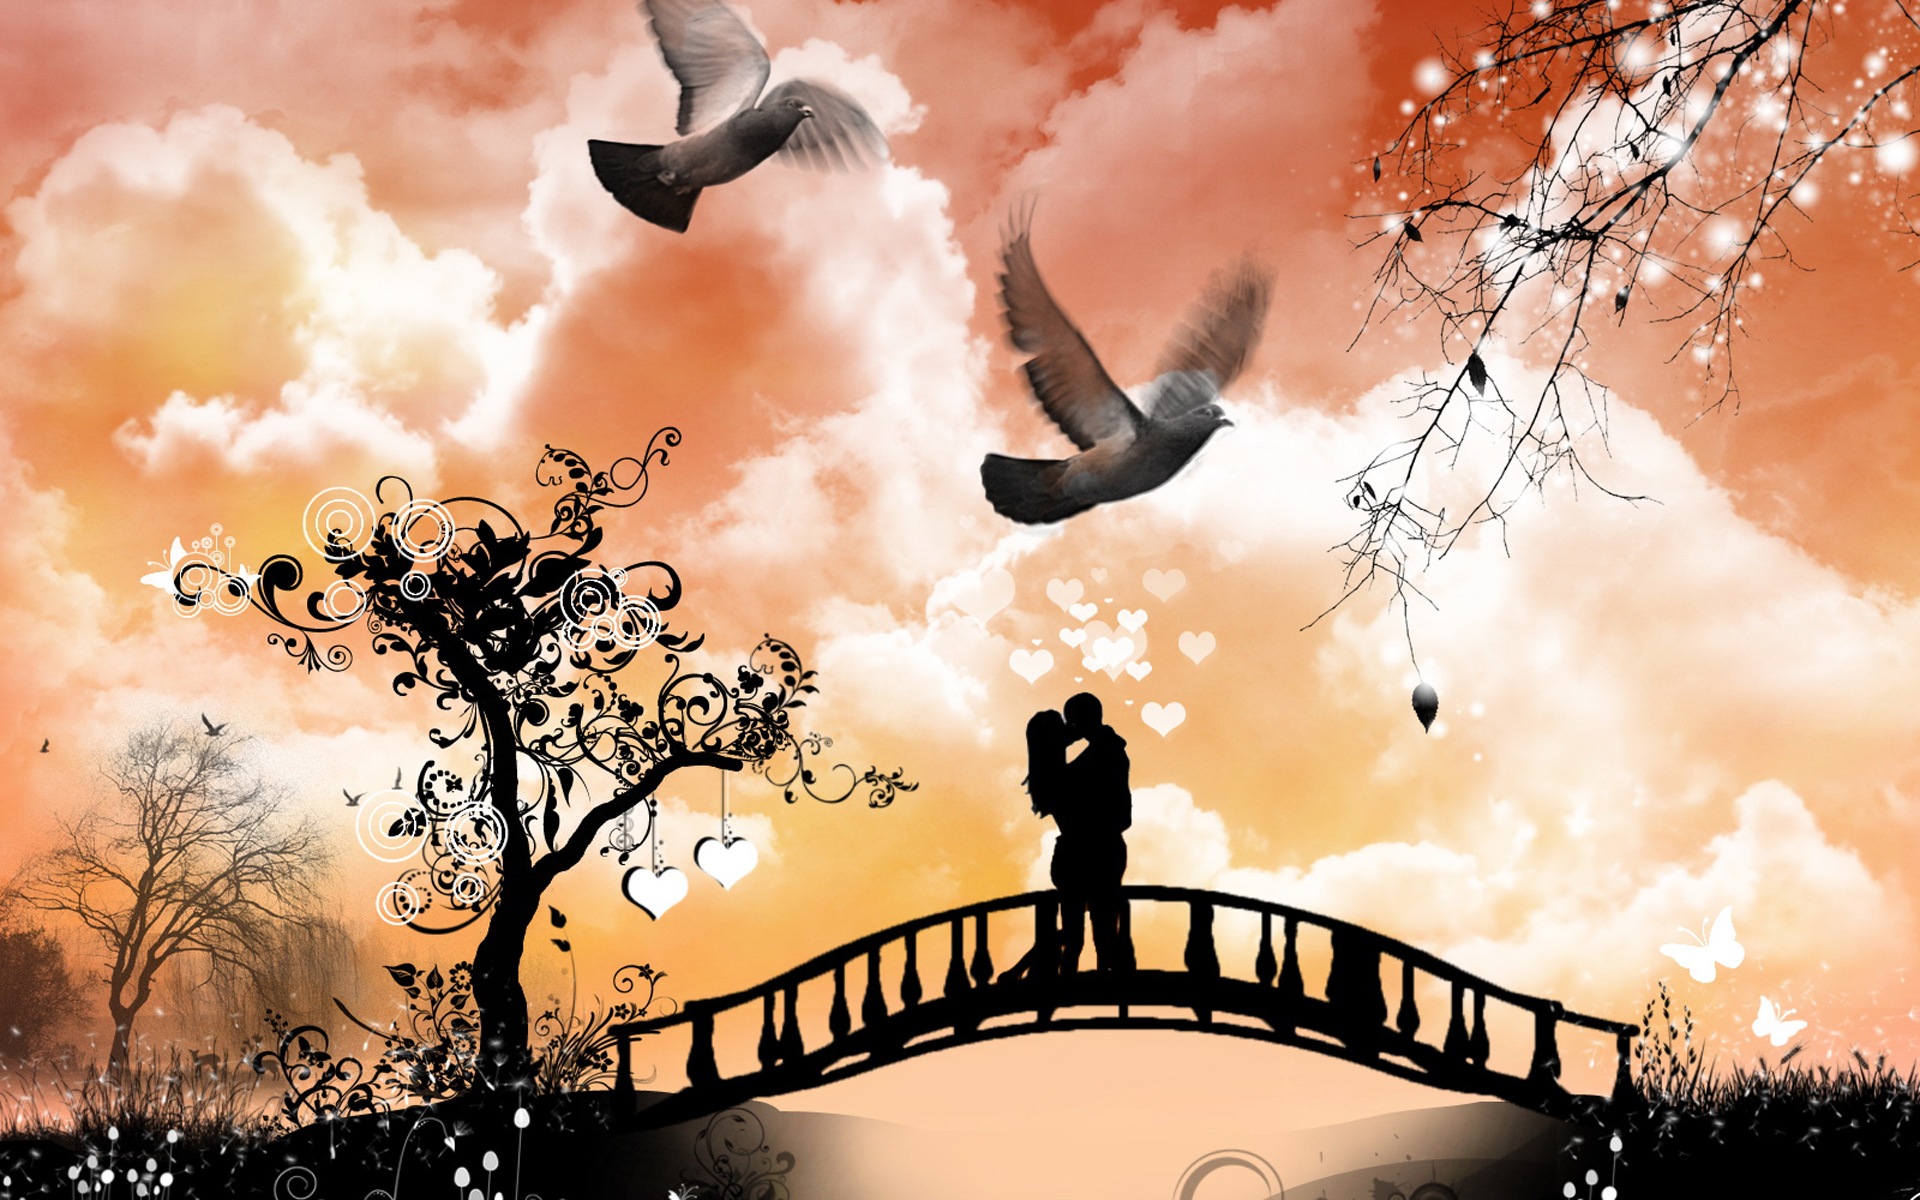 Warm and romantic Valentine's Day HD wallpapers #20 - 1920x1200